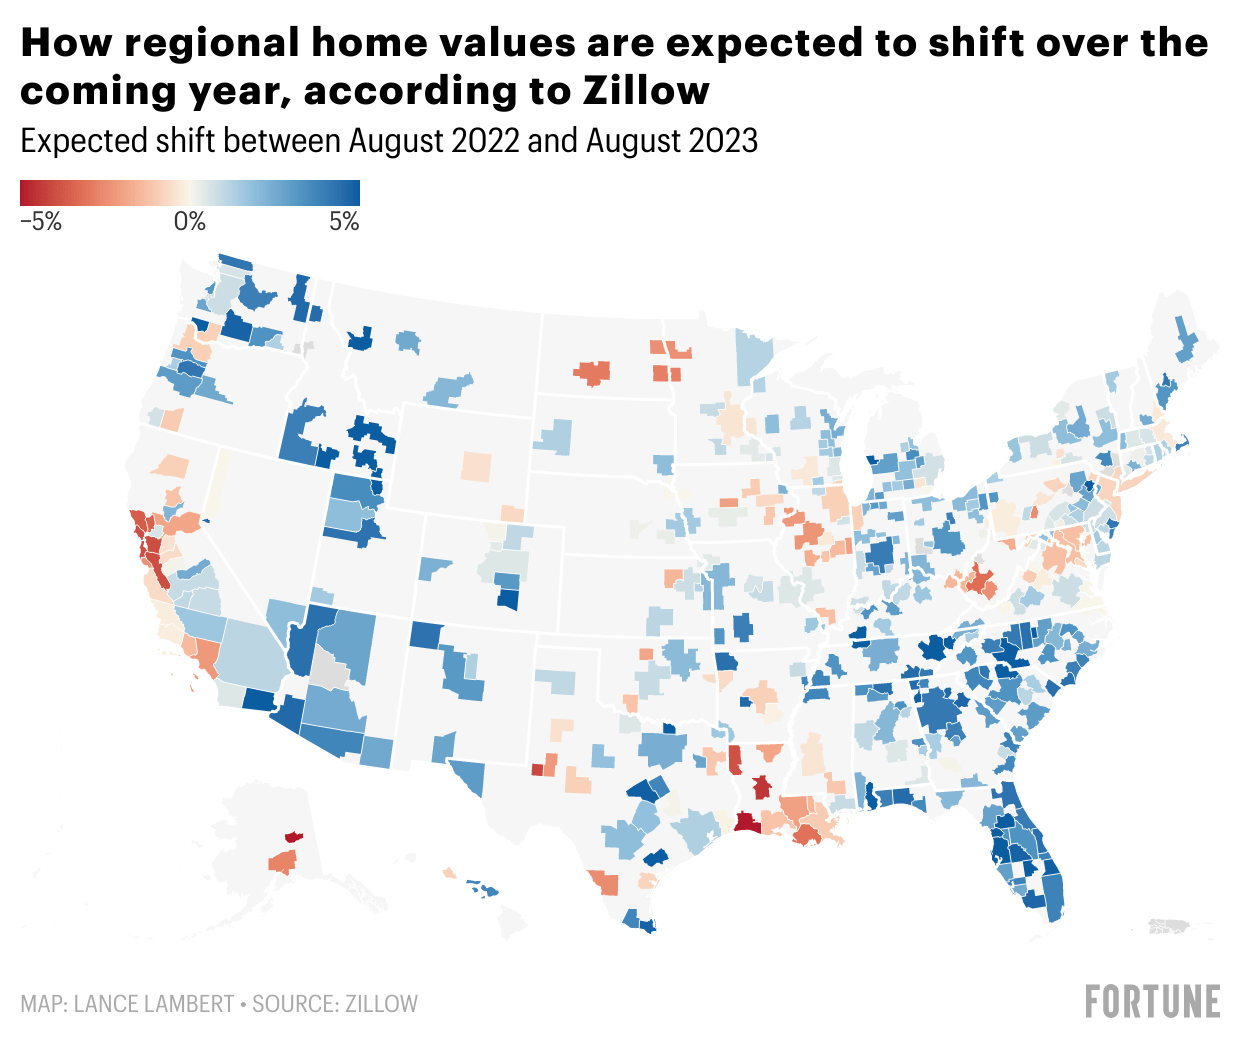 nAxSK-how-regional-home-values-are-expected-to-shift-over-the-coming-year-according-to-zillow.png